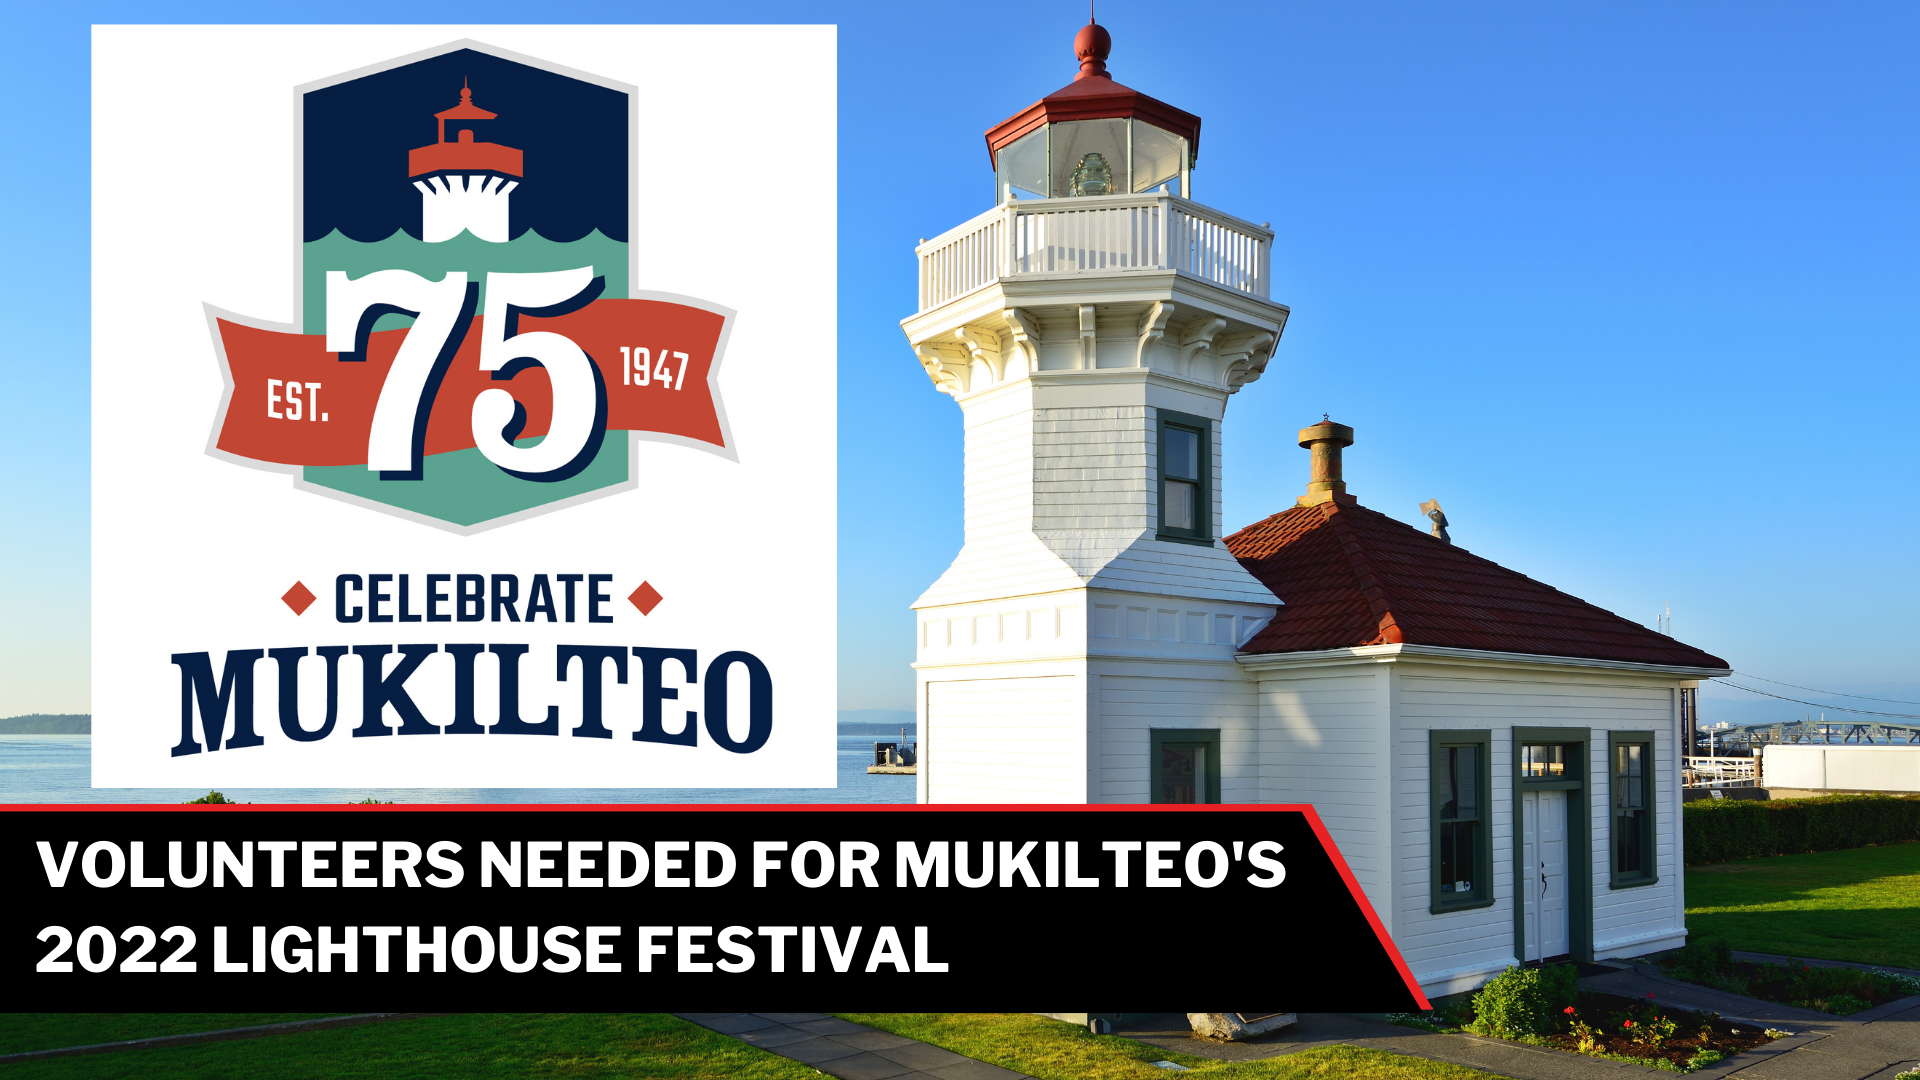 Volunteers needed for Mukilteo's Lighthouse Festival! Lynnwood Times